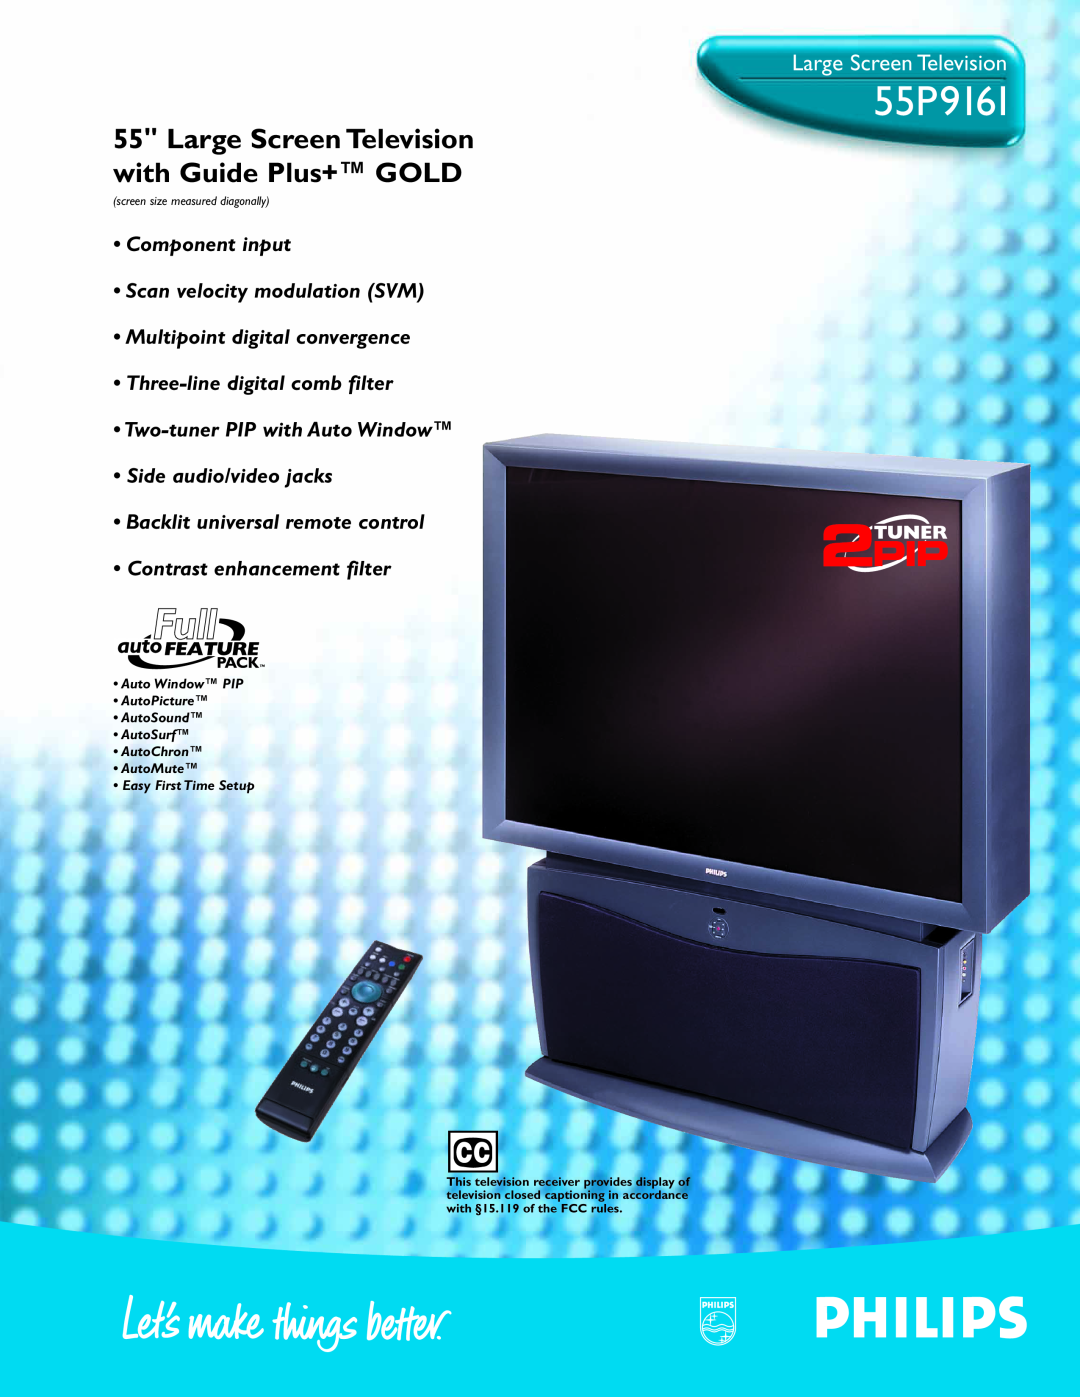 Philips 55P 9161 manual 55P9161, Large Screen Television with Guide Plus+ GOLD 